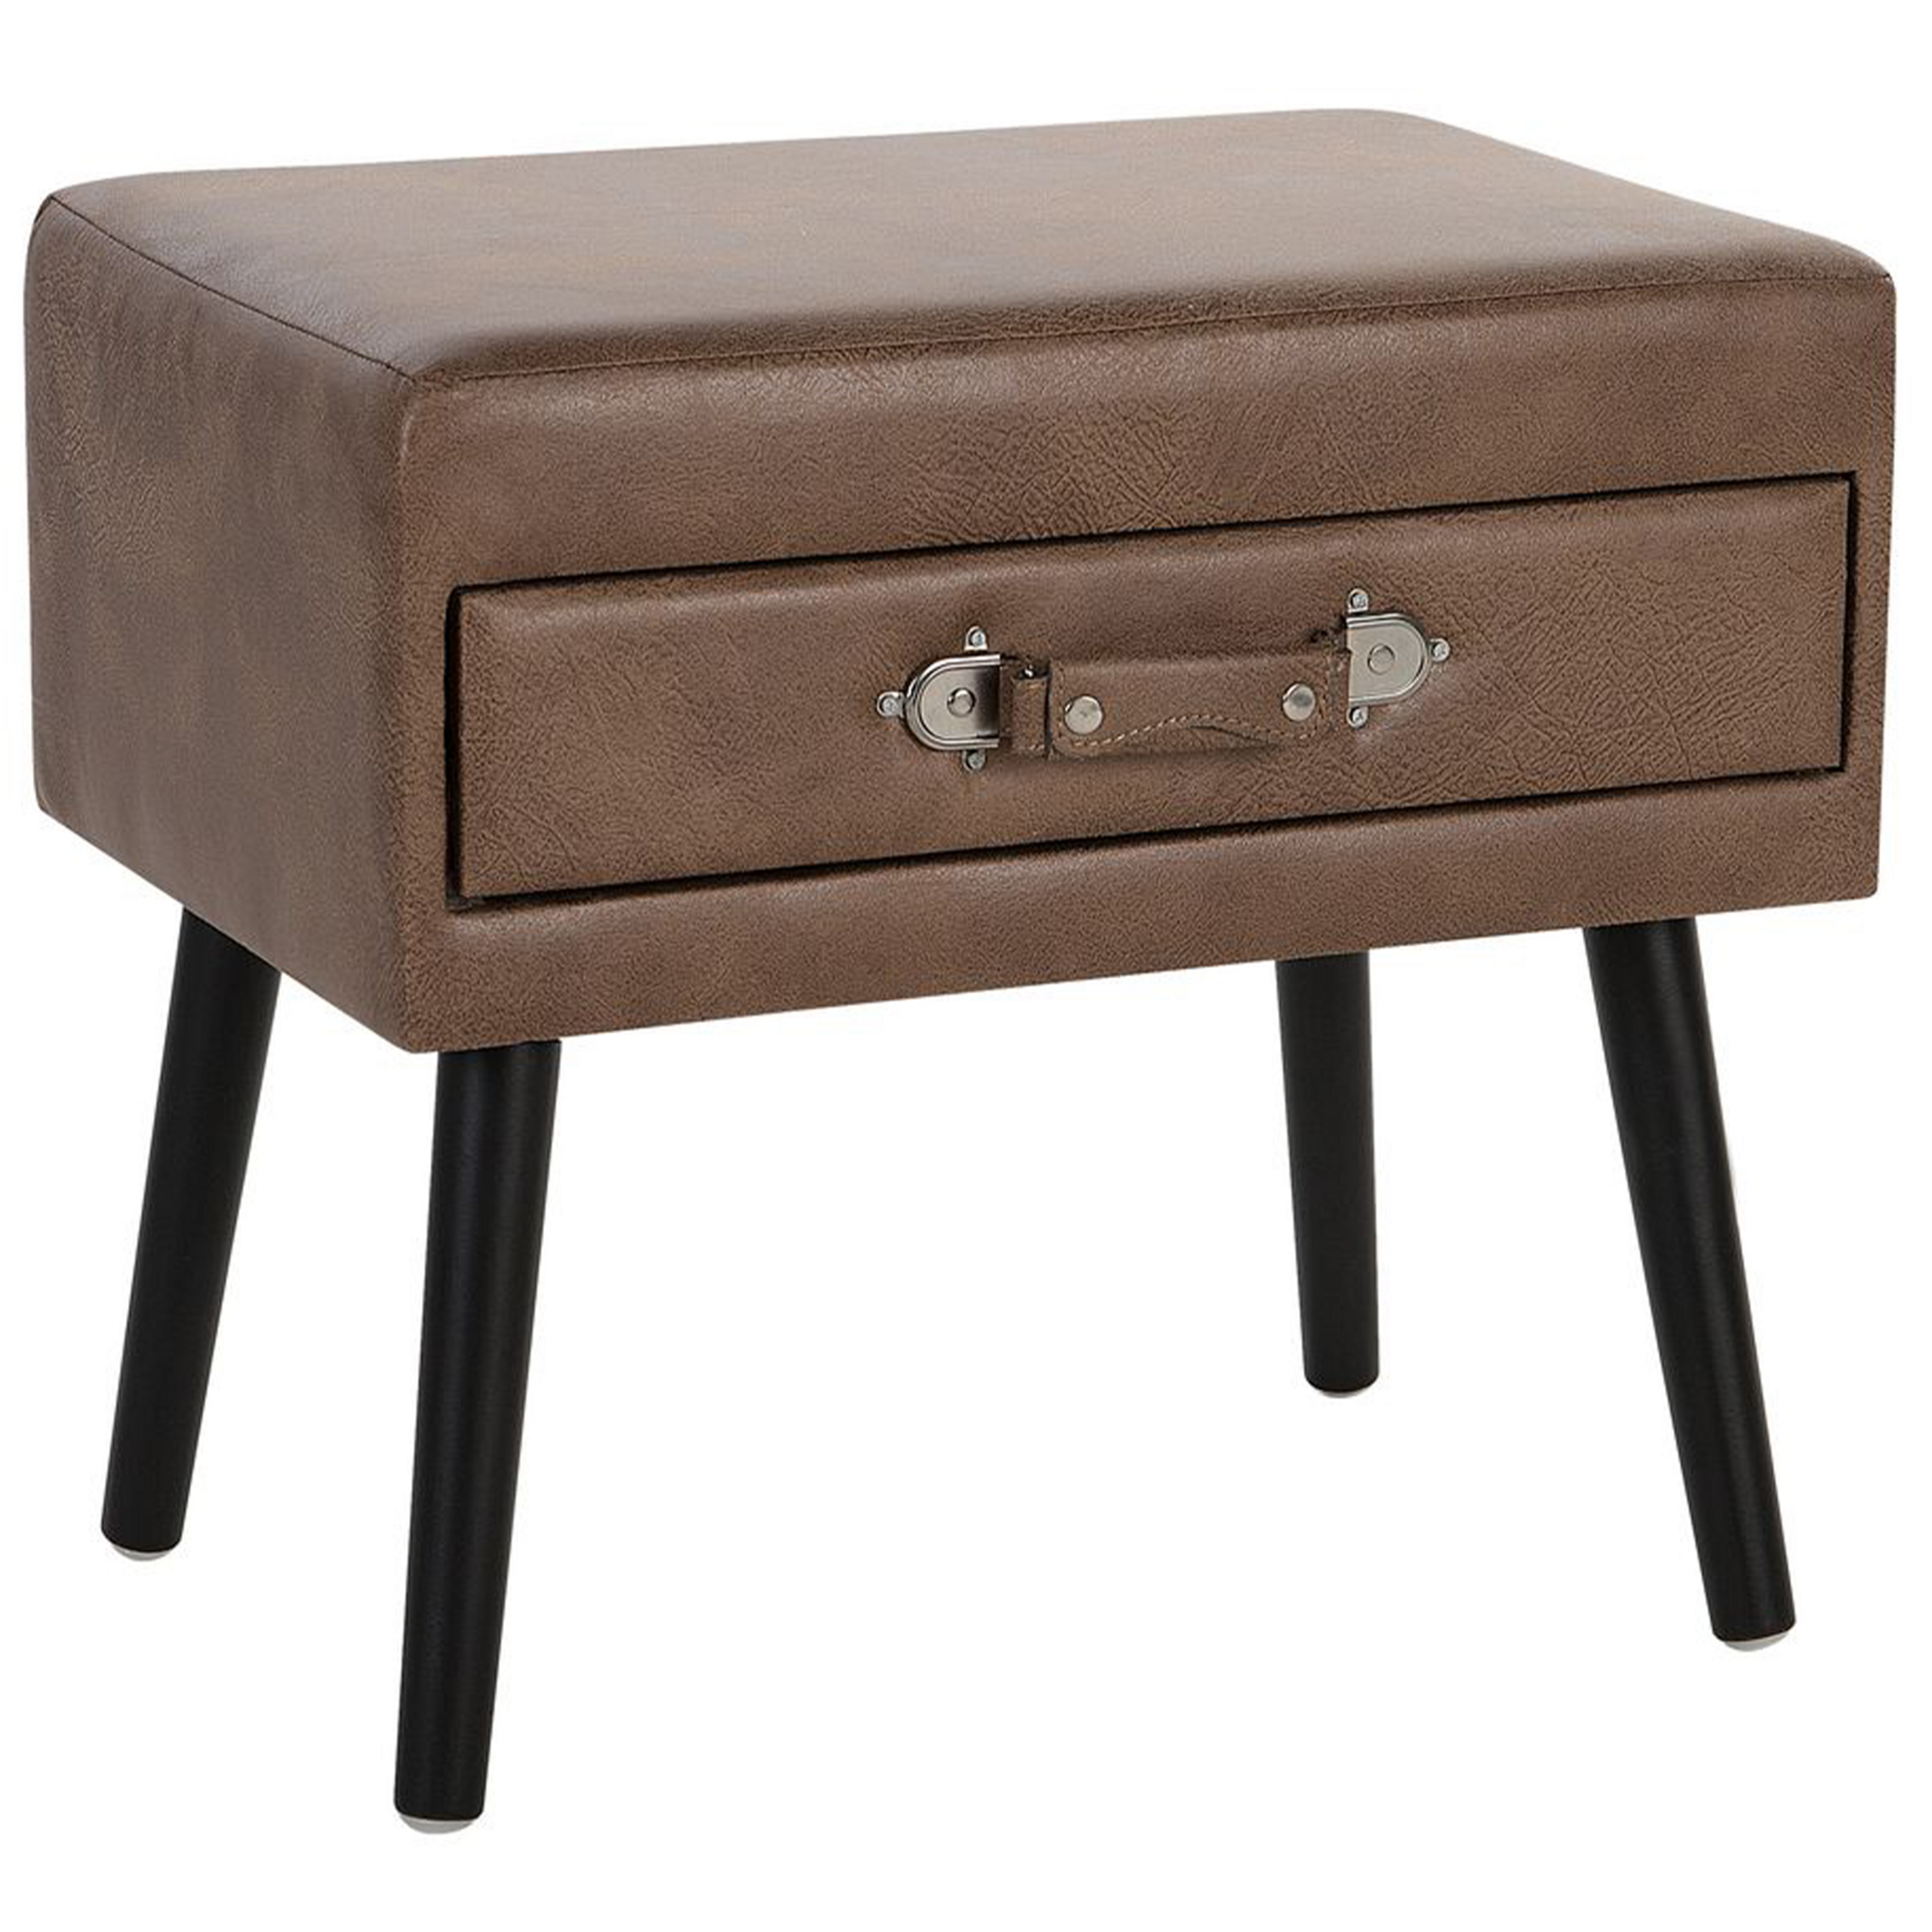 Beliani Side Table with Storage Brown Velvet Upholstery Black Legs 46 x 50 x 35 cm Suitcase